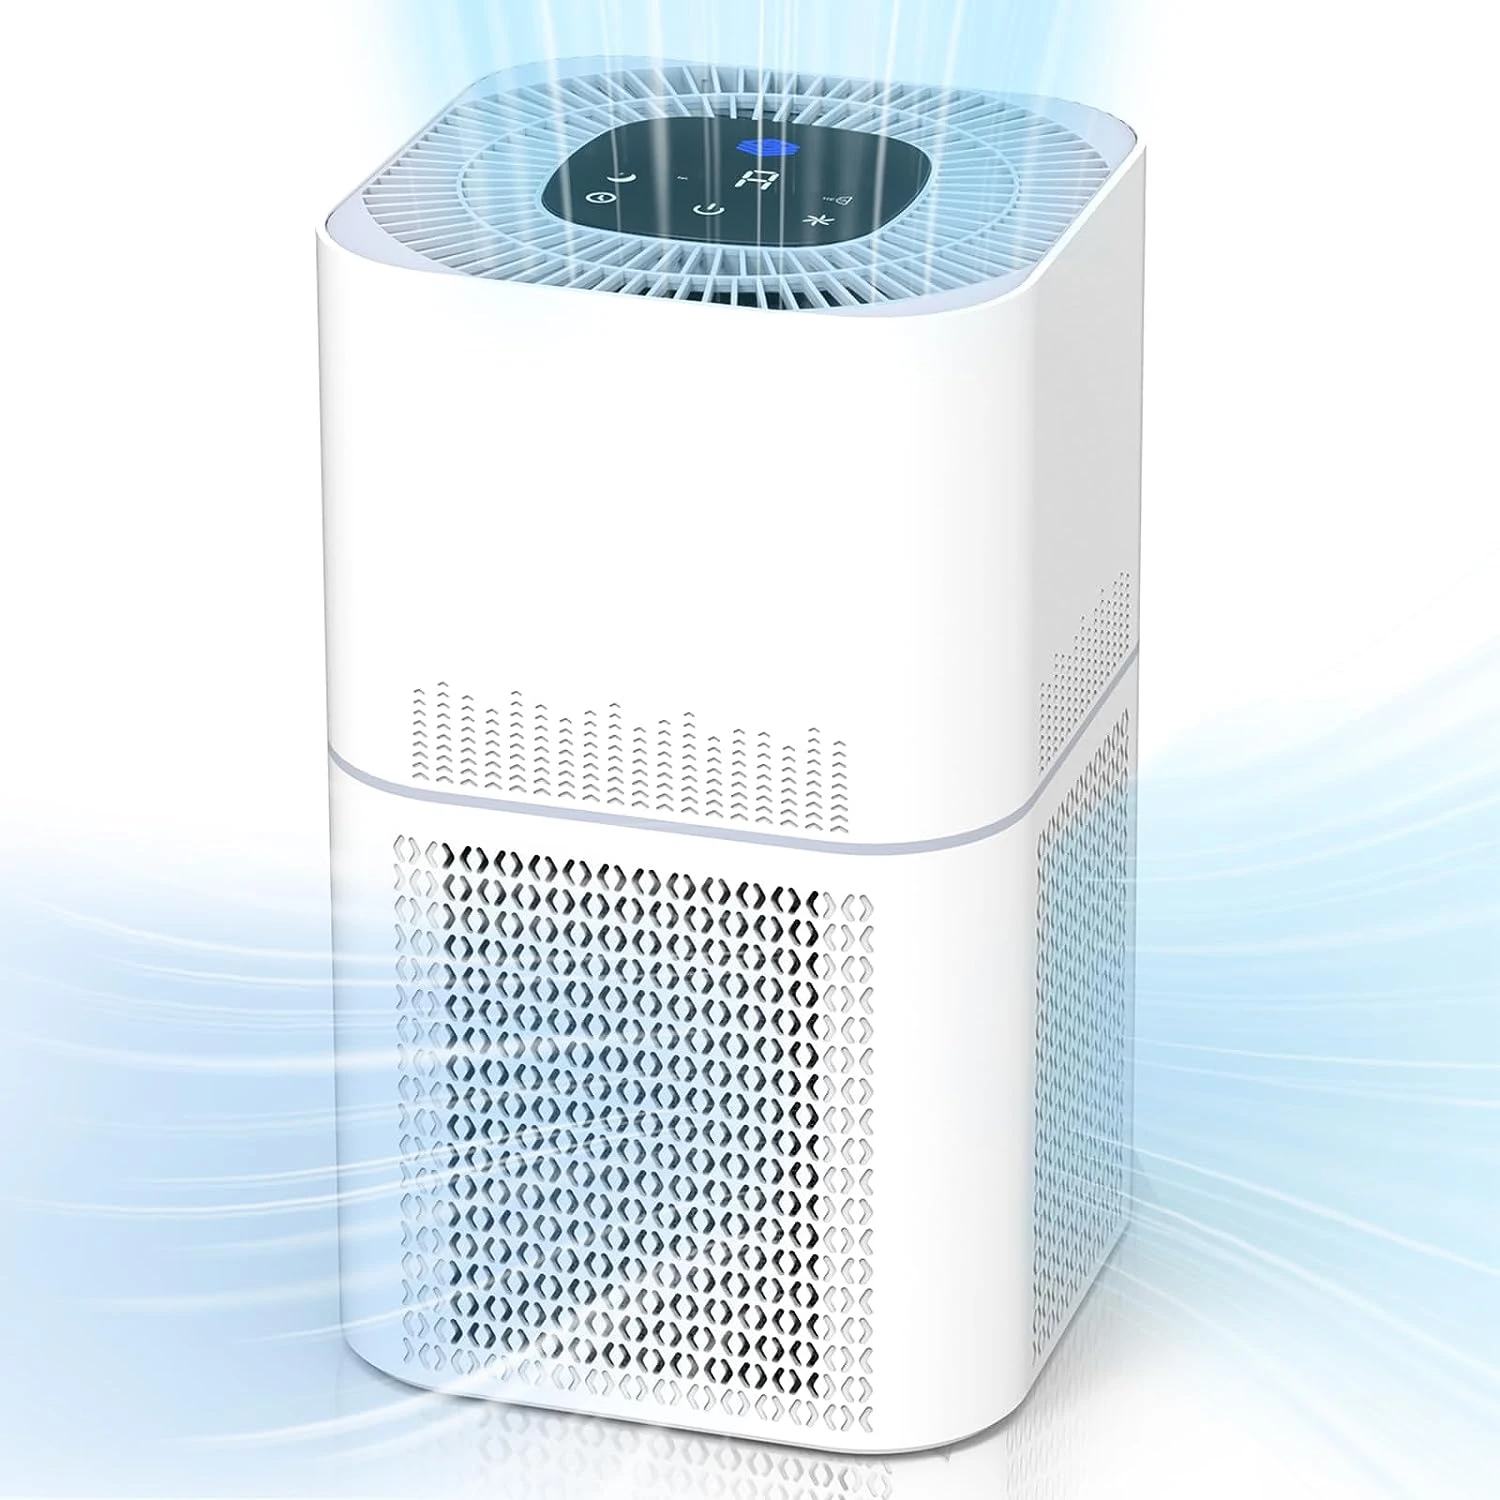 

HEPA Air Purifiers for Home Large Room, CADR 300+m³/h Up to 1290ft² with Air Quality Sensor, H13 True HEPA Filter Remove 99.97